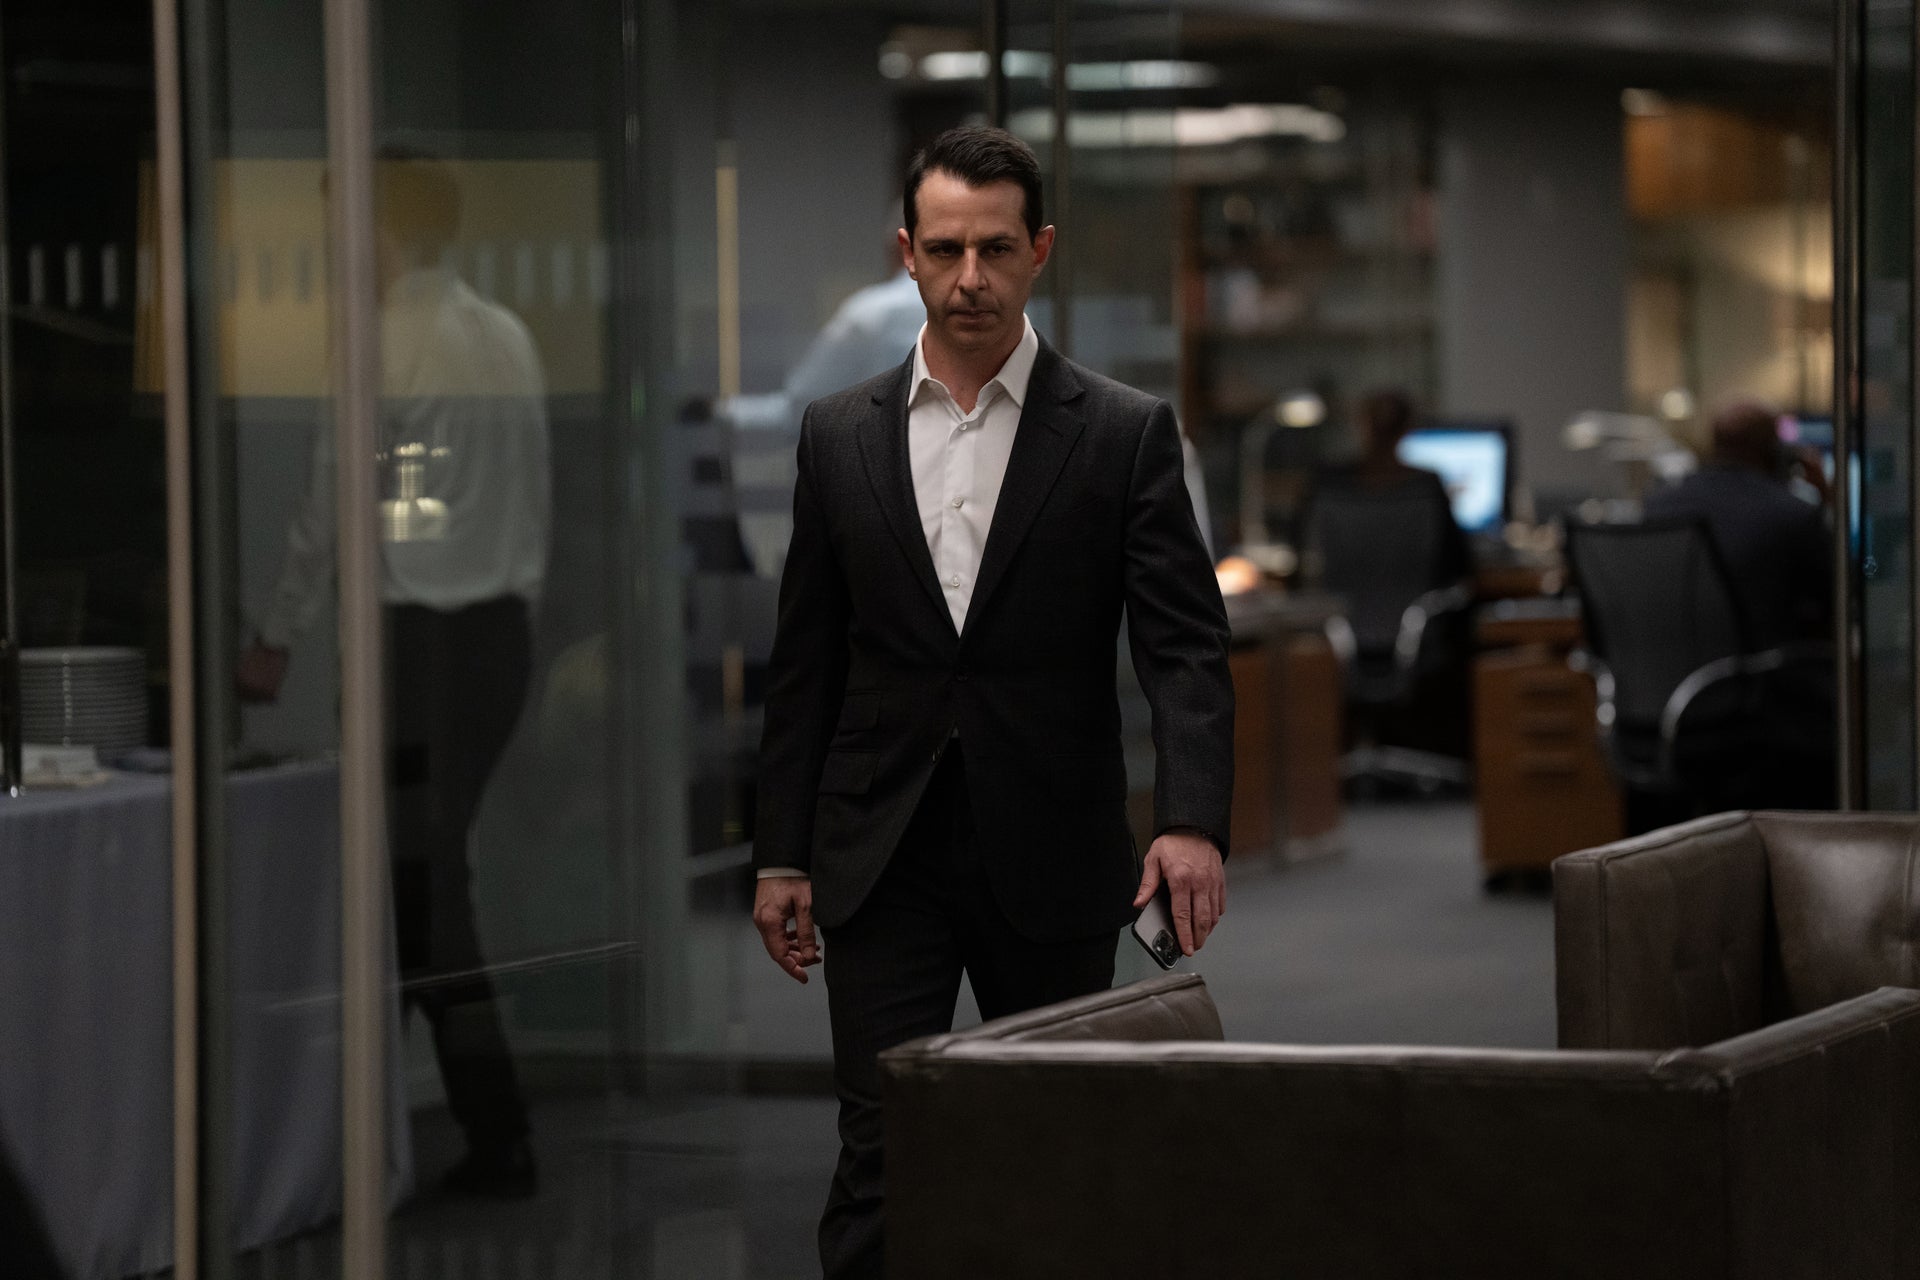 In a black suit and an unbuttoned white shirt, he struts confidently but somberly down an office hallway.